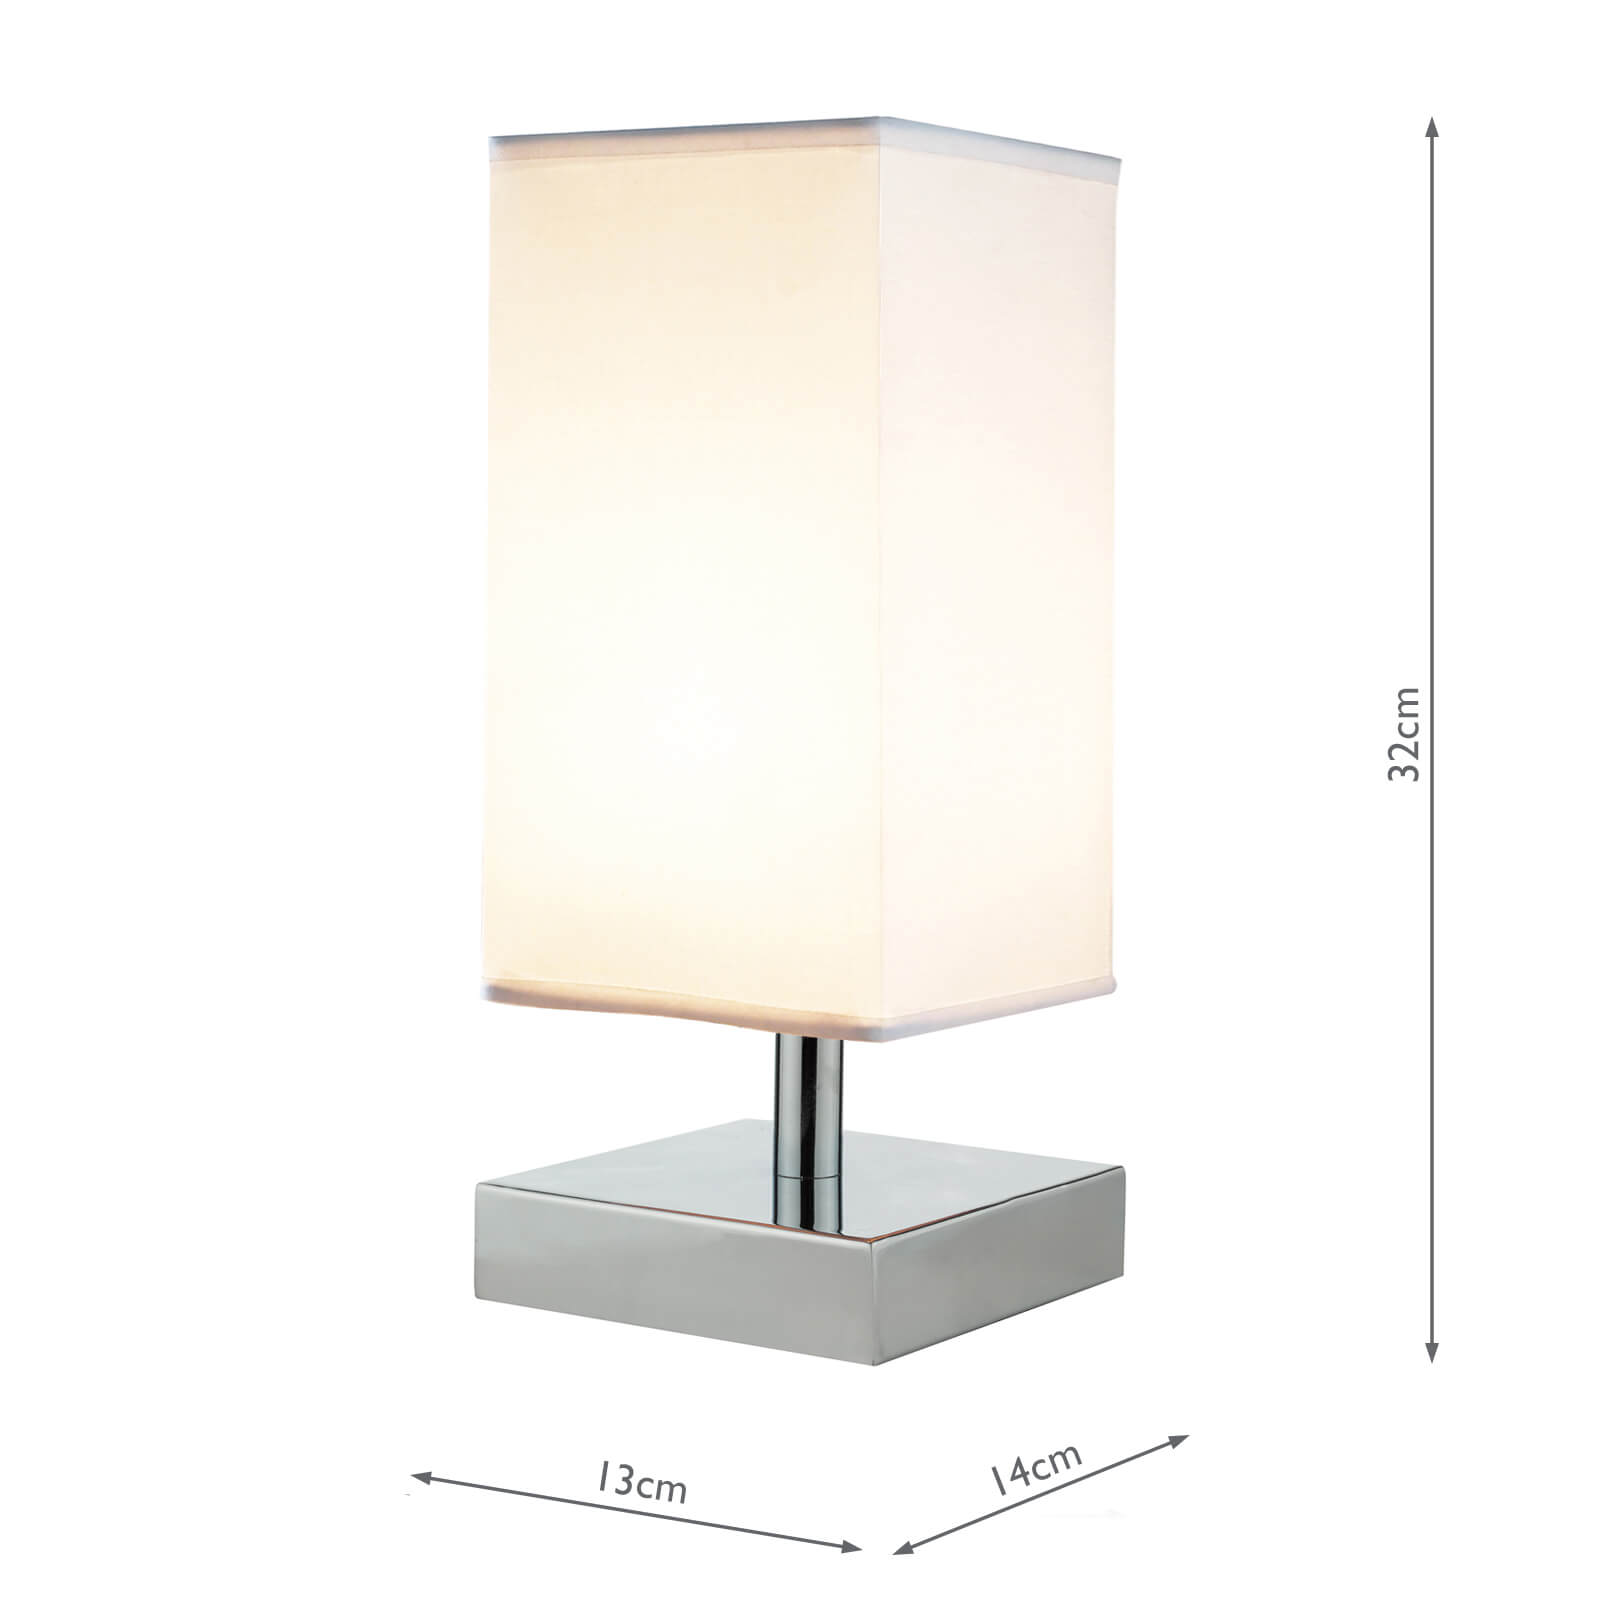 Drayton Touch Table Lamp Square C W, White Square Table Lamp